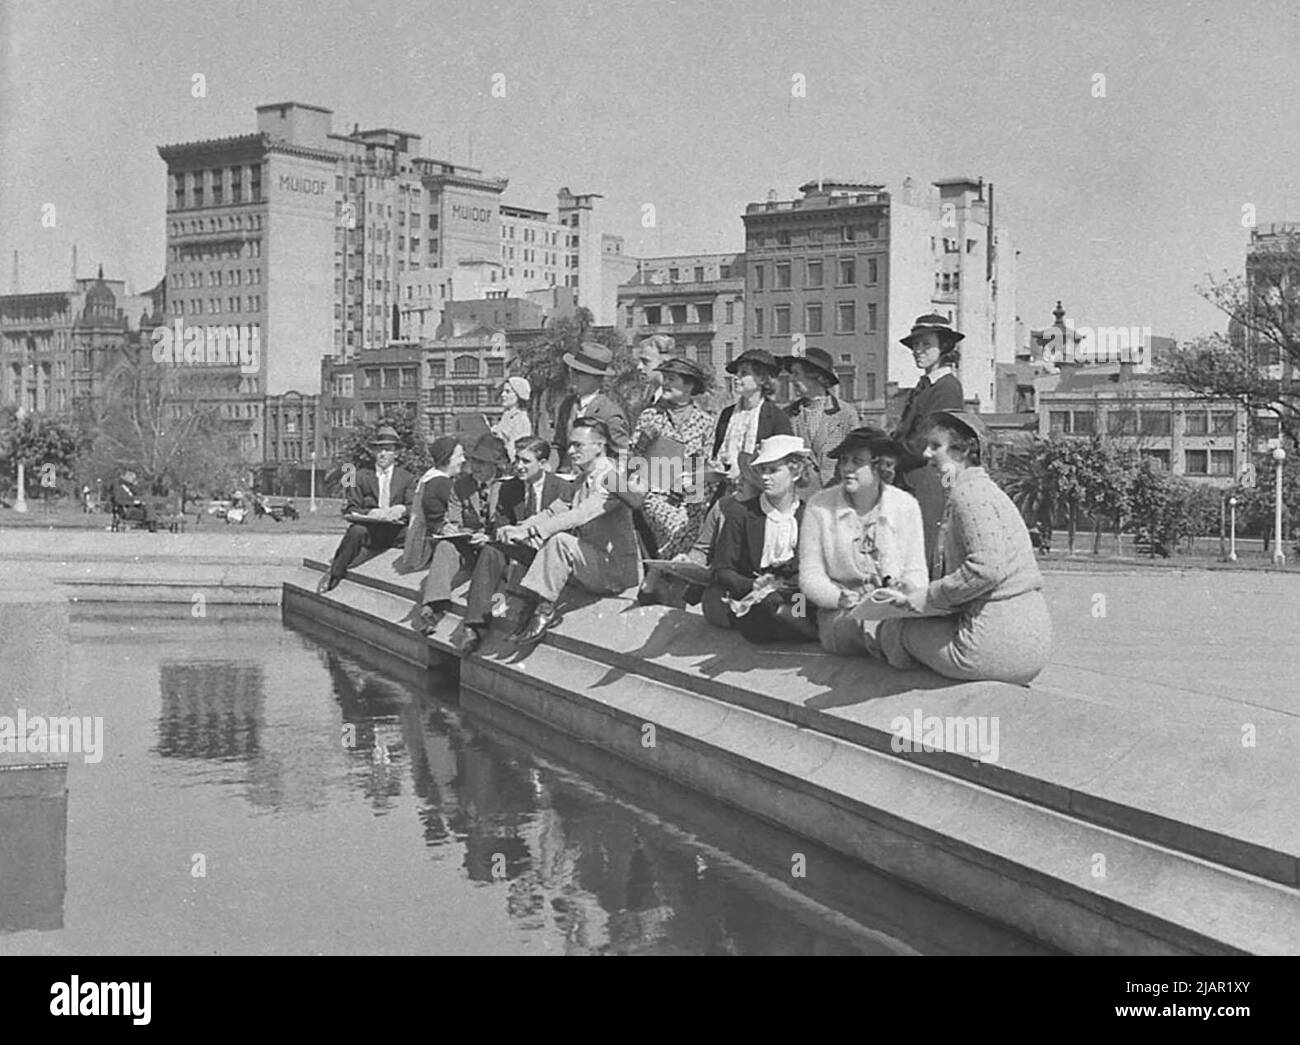 Group of men and women sitting near a pond in a city, possibly Sydney Australia ca. 1936 Stock Photo